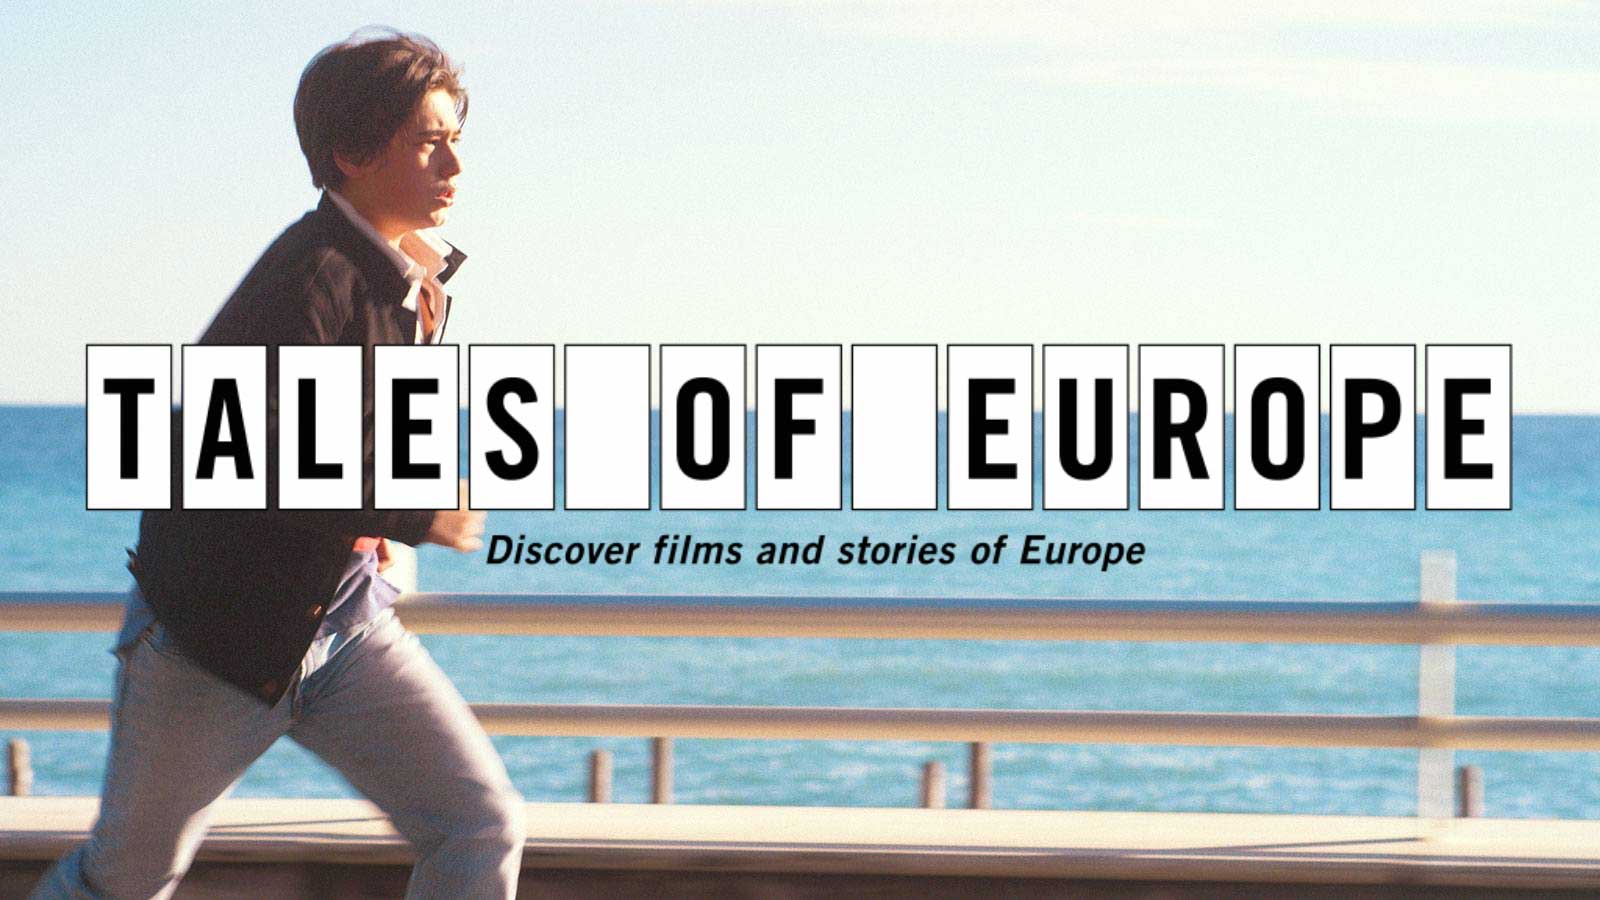 Tales of Europe